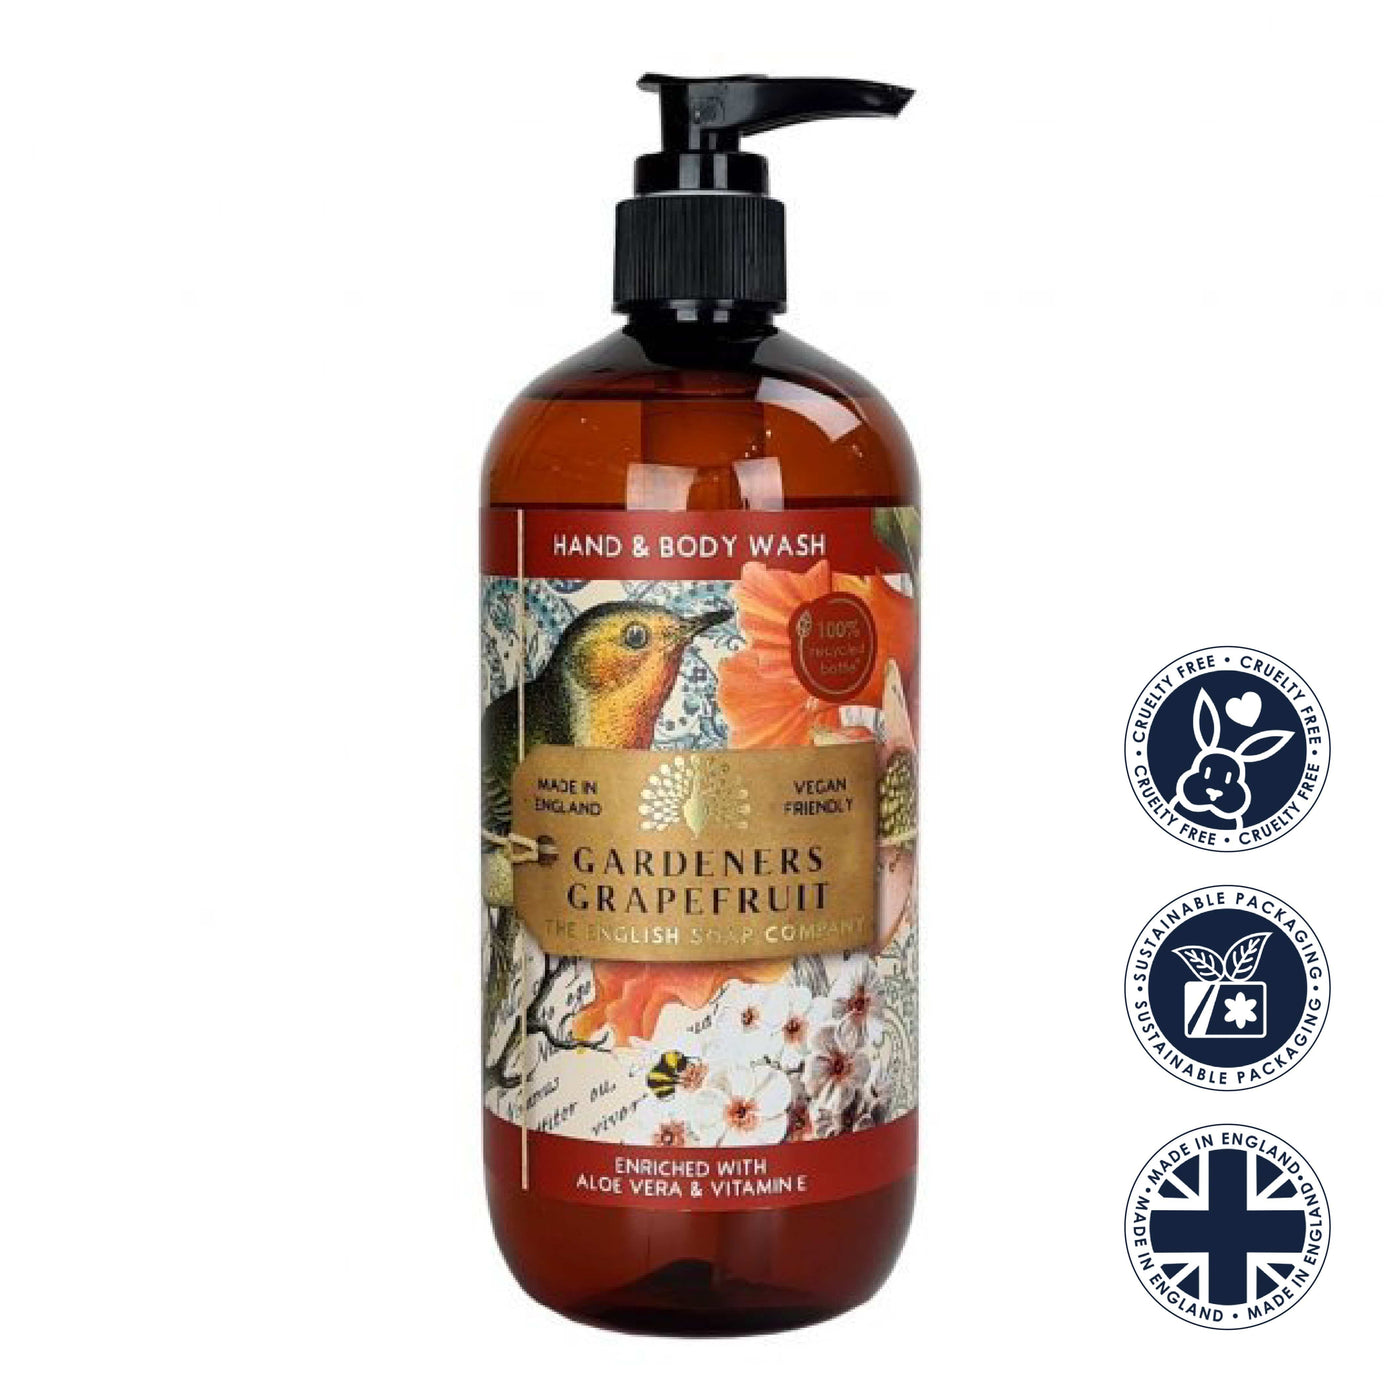 Gardeners Grapefruit Hand & Body Wash - Anniversary Collection from our Liquid Hand & Body Soap collection by The English Soap Company